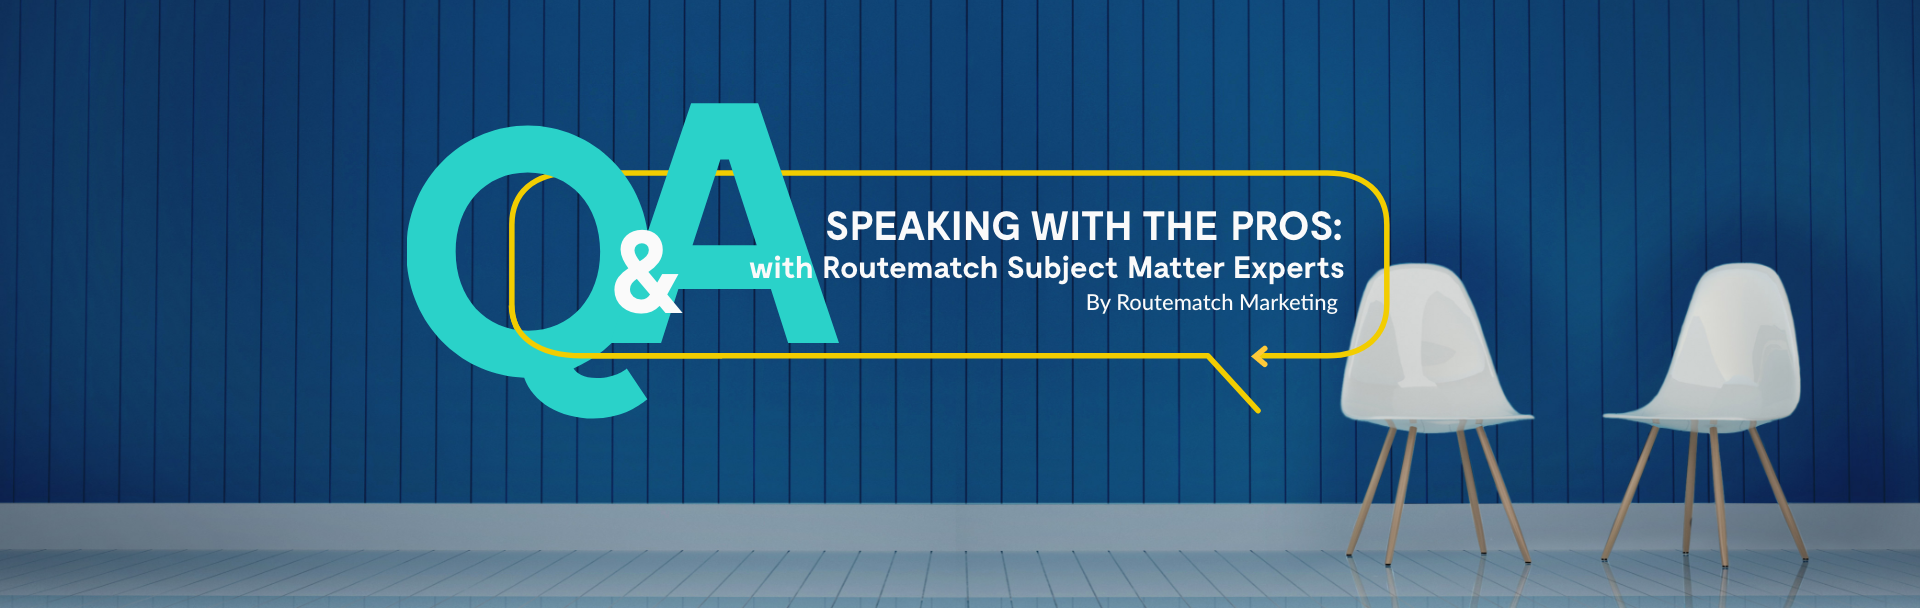 Speaking With the Pros: Q&A with Routematch Subject Matter Experts By Routematch Marketing